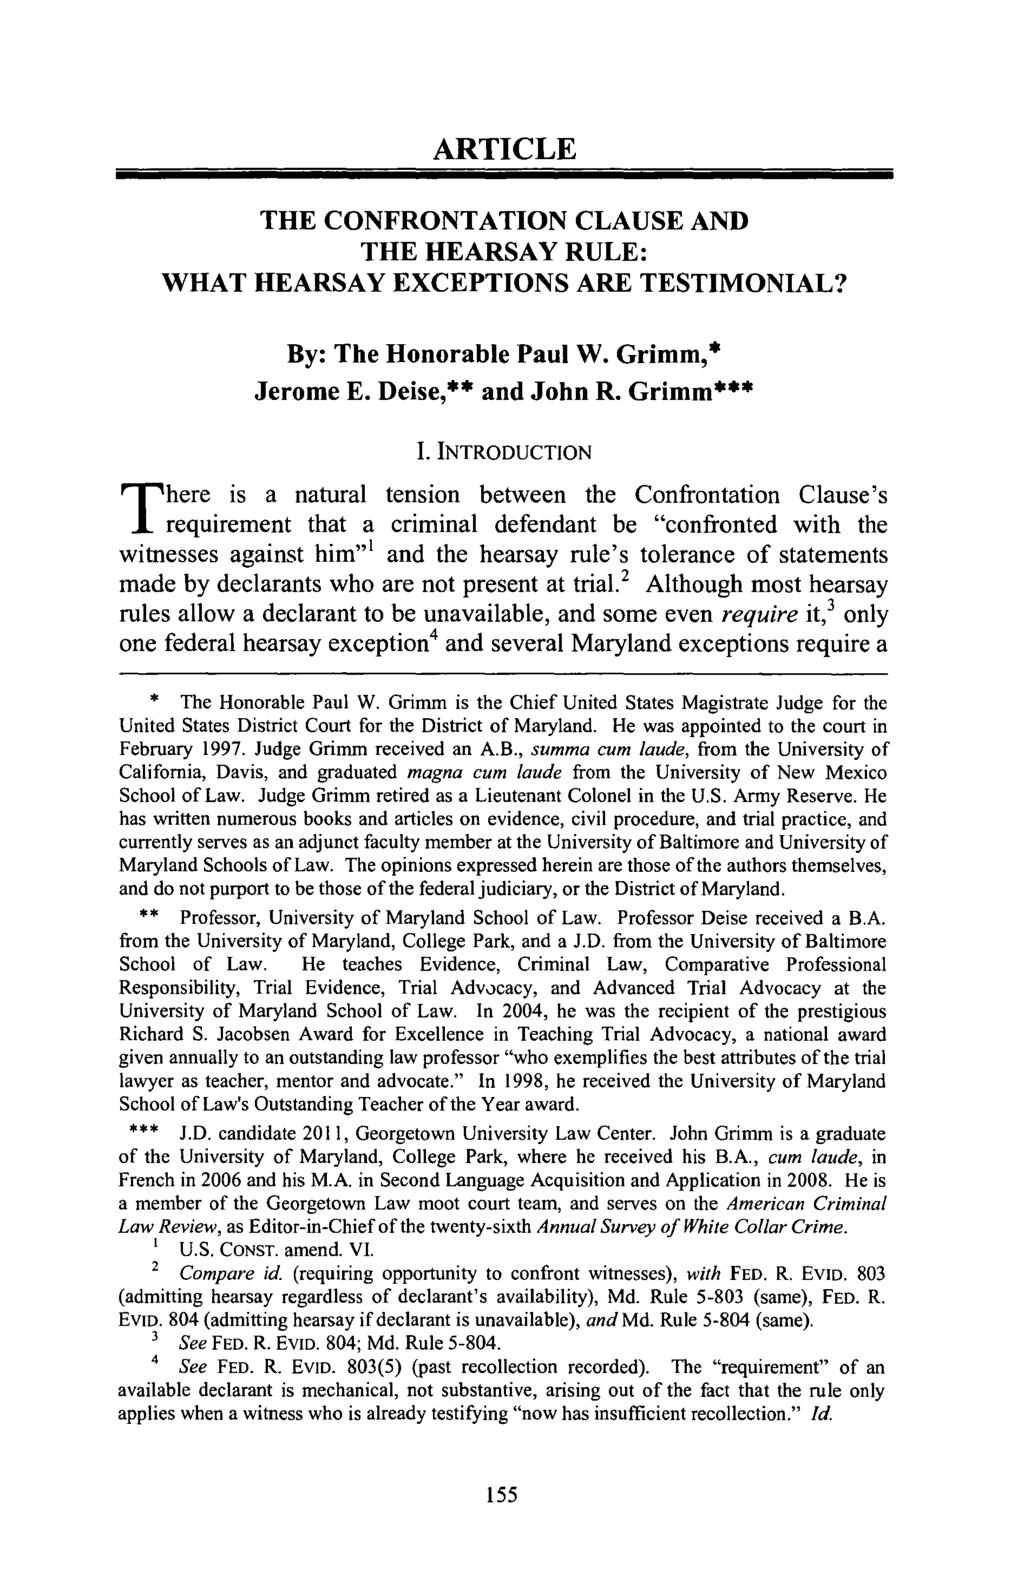 ARTICLE THE CONFRONTATION CLAUSE AND THE HEARSAY RULE: WHAT HEARSAY EXCEPTIONS ARE TESTIMONIAL? By: The Honorable Paul W. Grimm, Jerome E. Deise, and John R. Grimm 1.